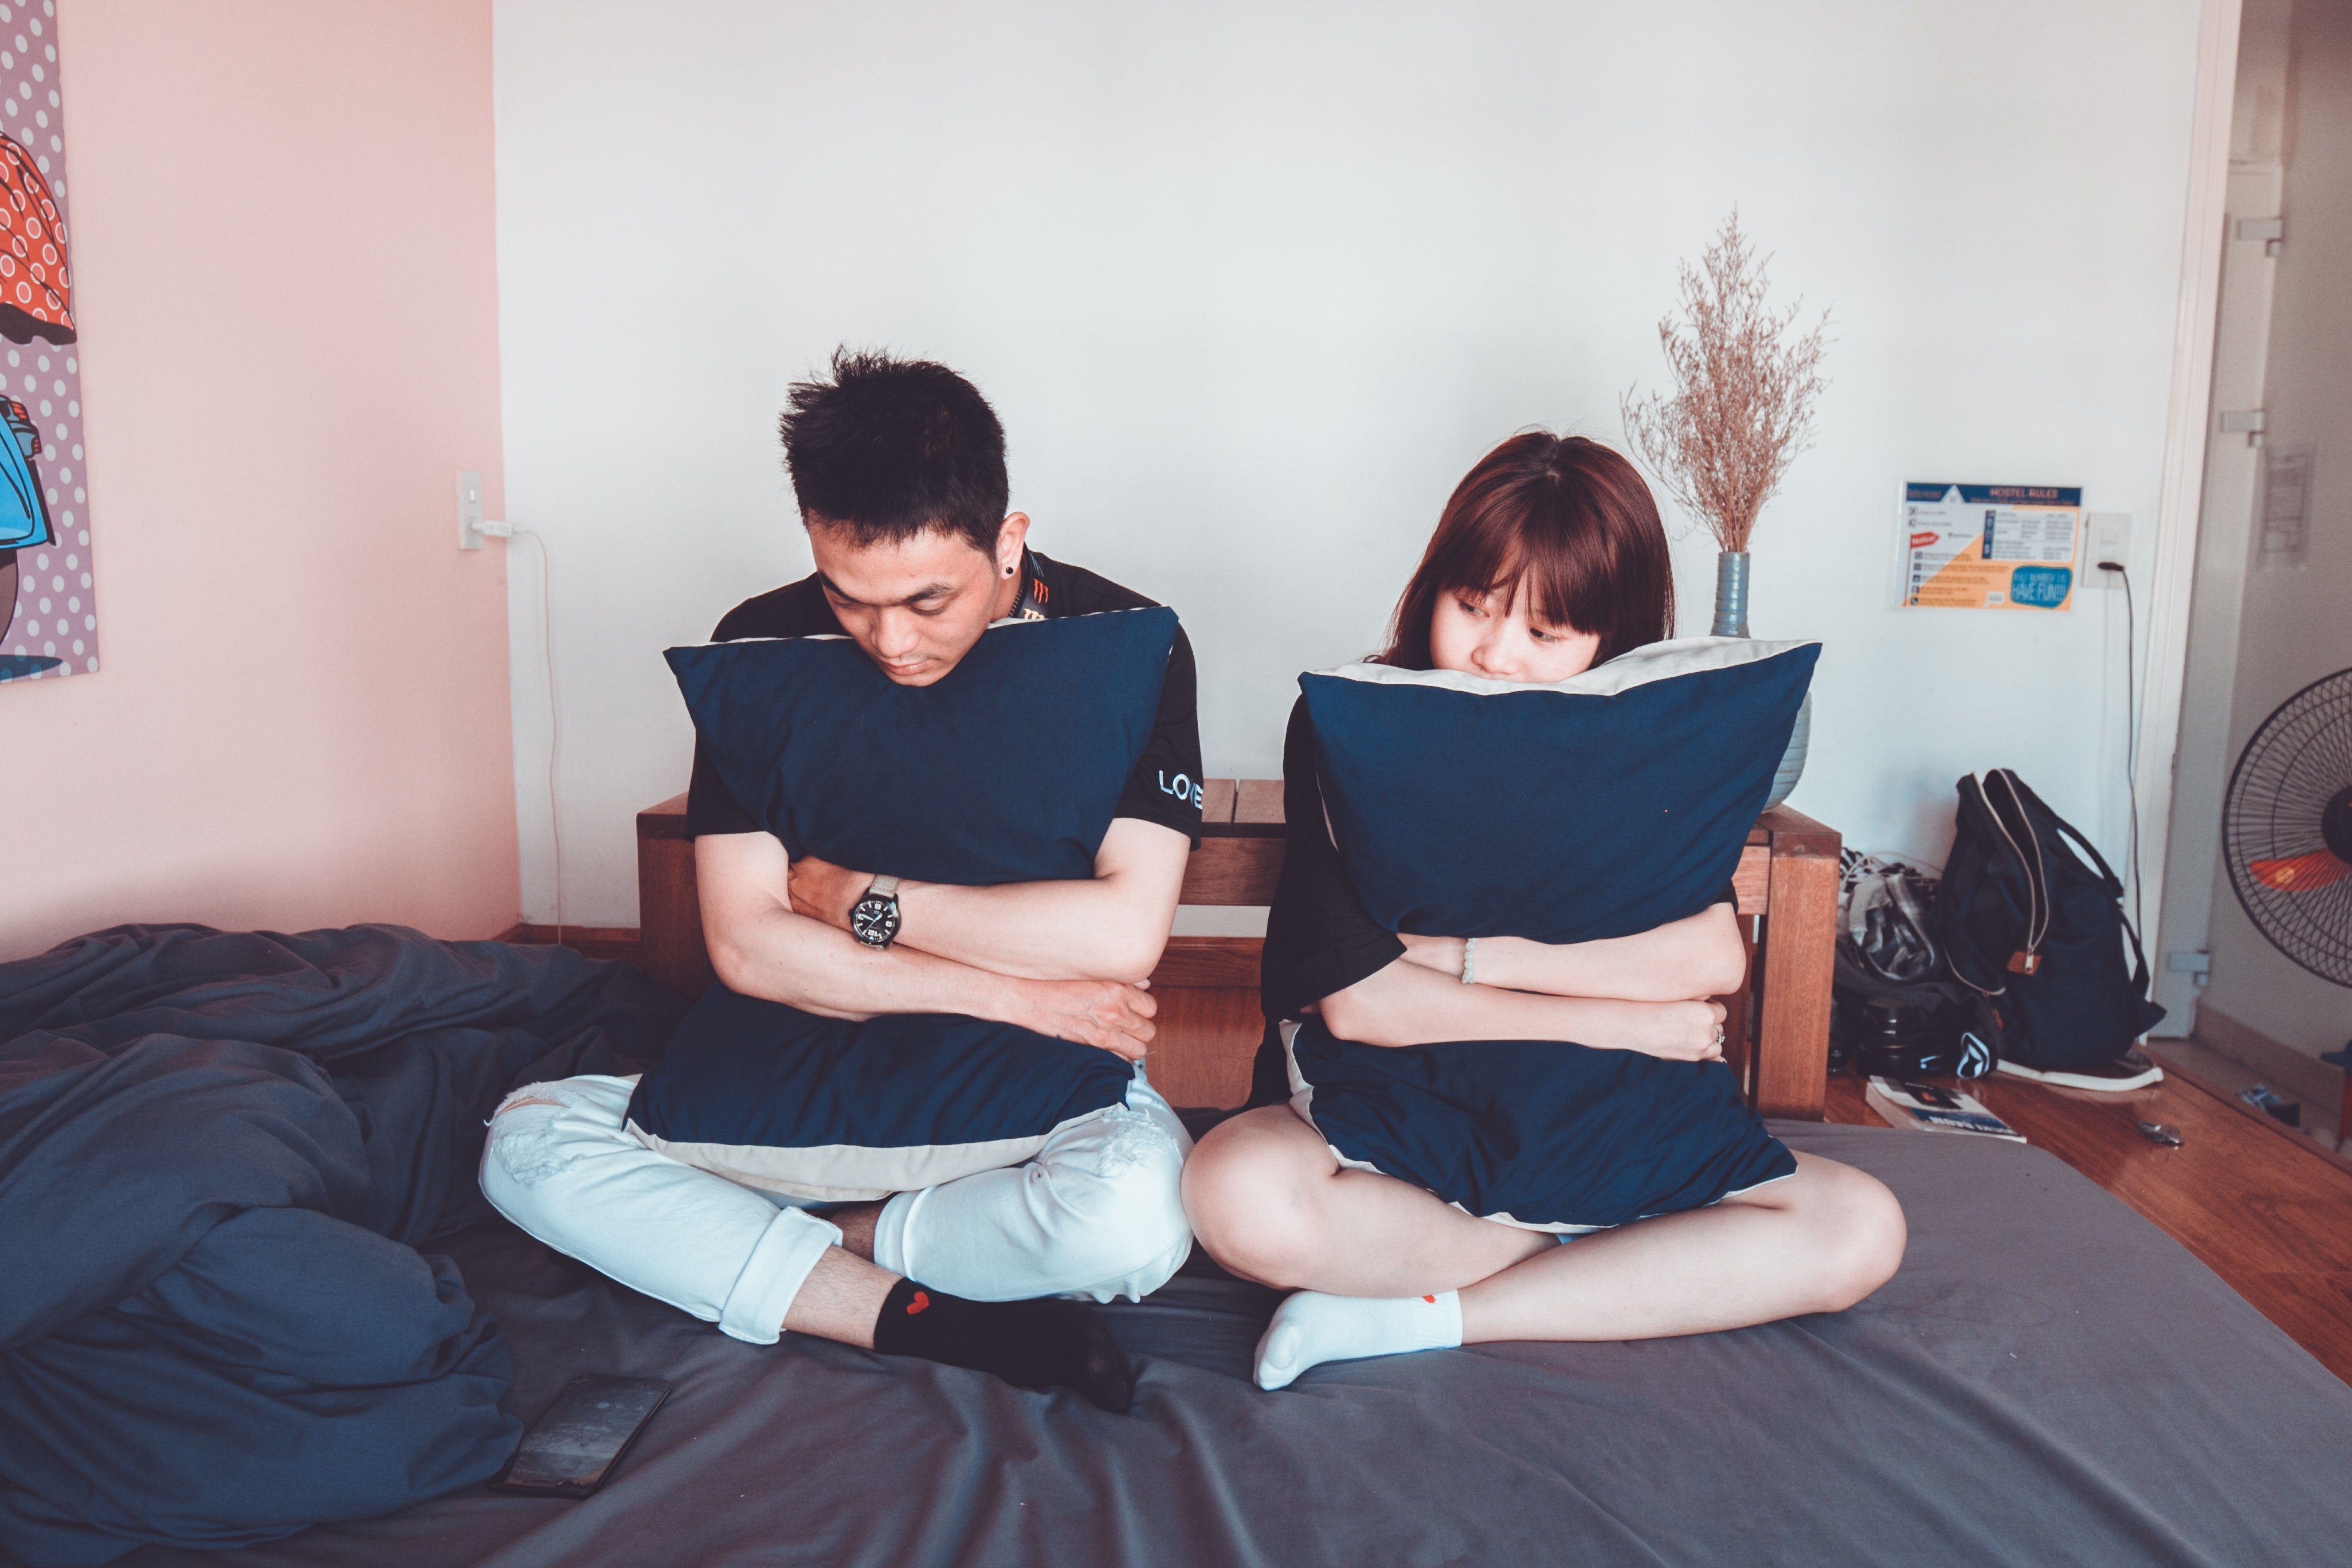 Couple sitting up in bed with pillows. | Source: Pexels